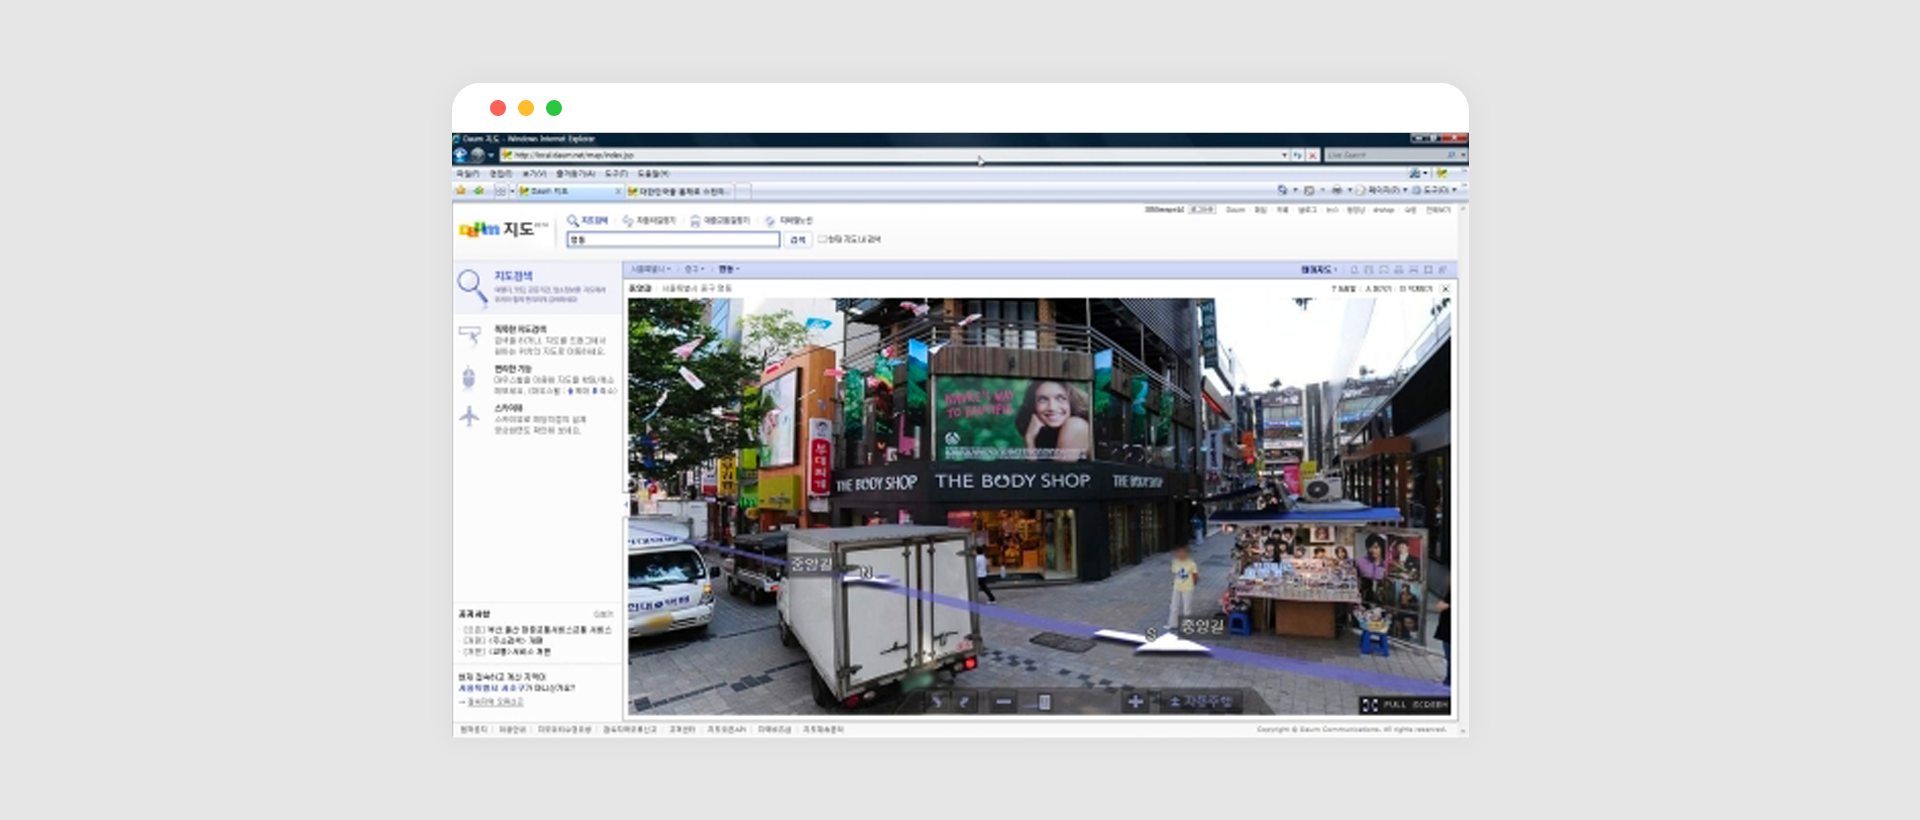 Early glimpse of Myeong-dong captured in the nascent stages of the official Street View service.